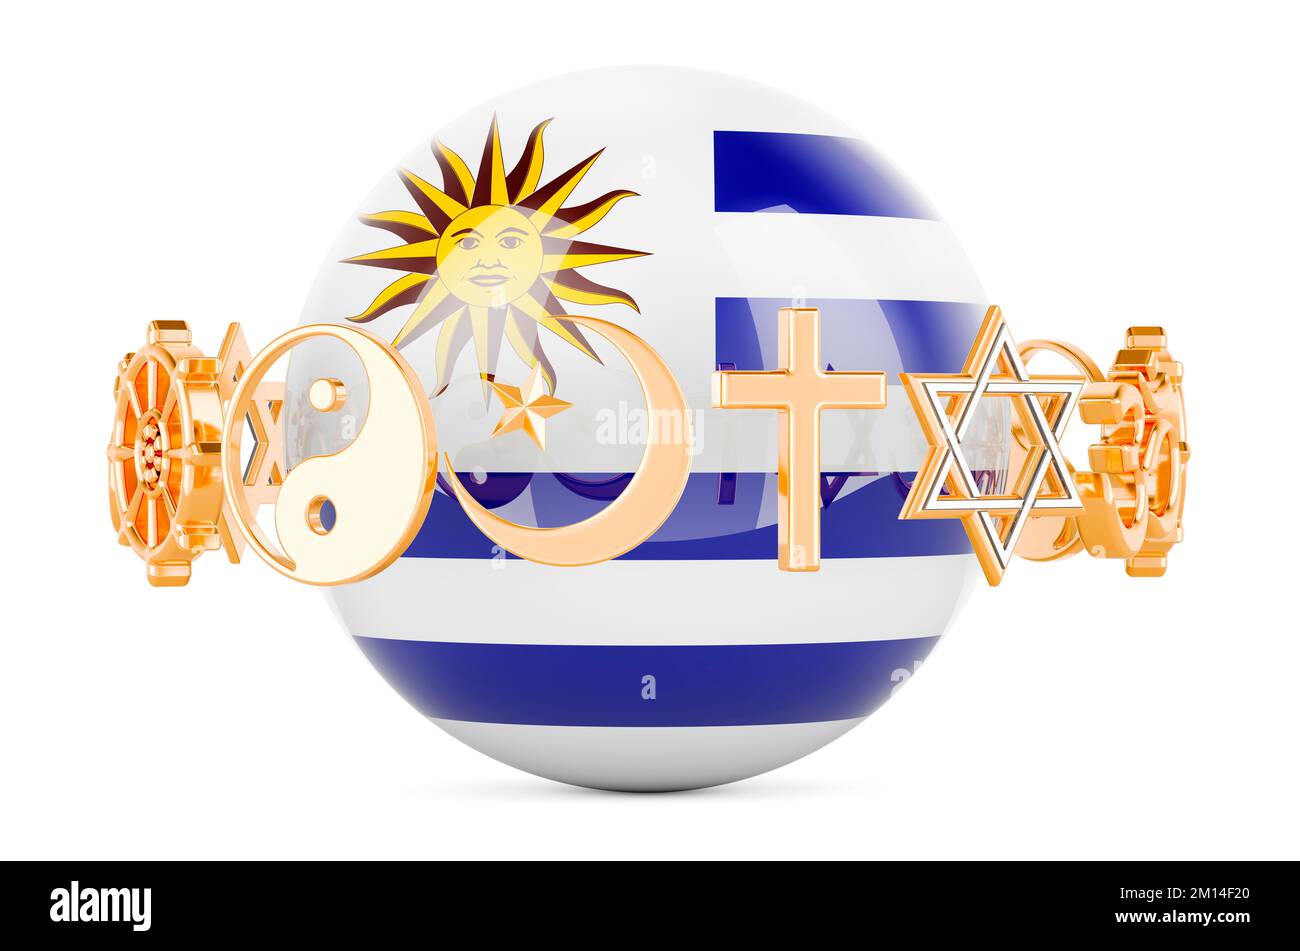 Uruguayan flag painted on sphere with religions symbols around, 3D rendering isolated on white background Stock Photo